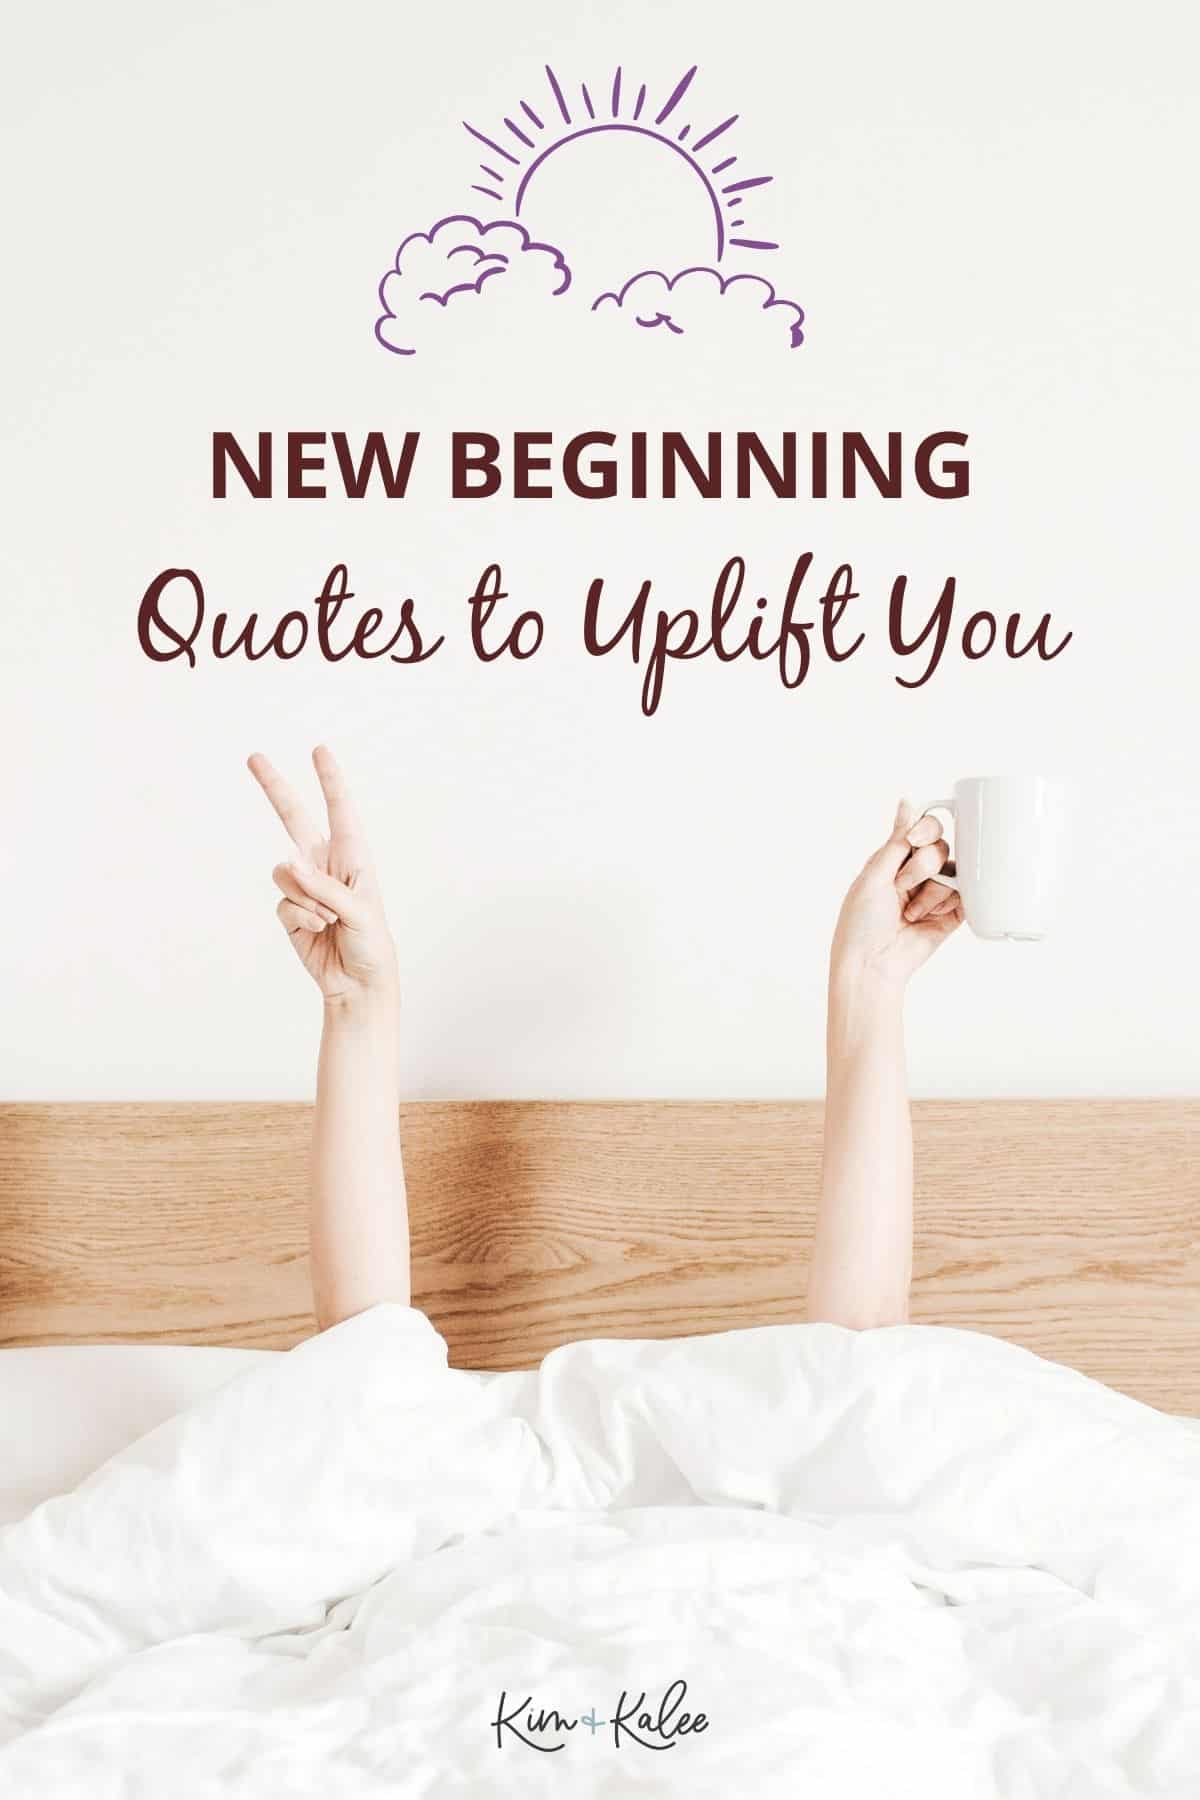 woman in the bed with the text overlay Whether it's a new year or you're seeking a new direction, these new beginning quotes will uplift you.